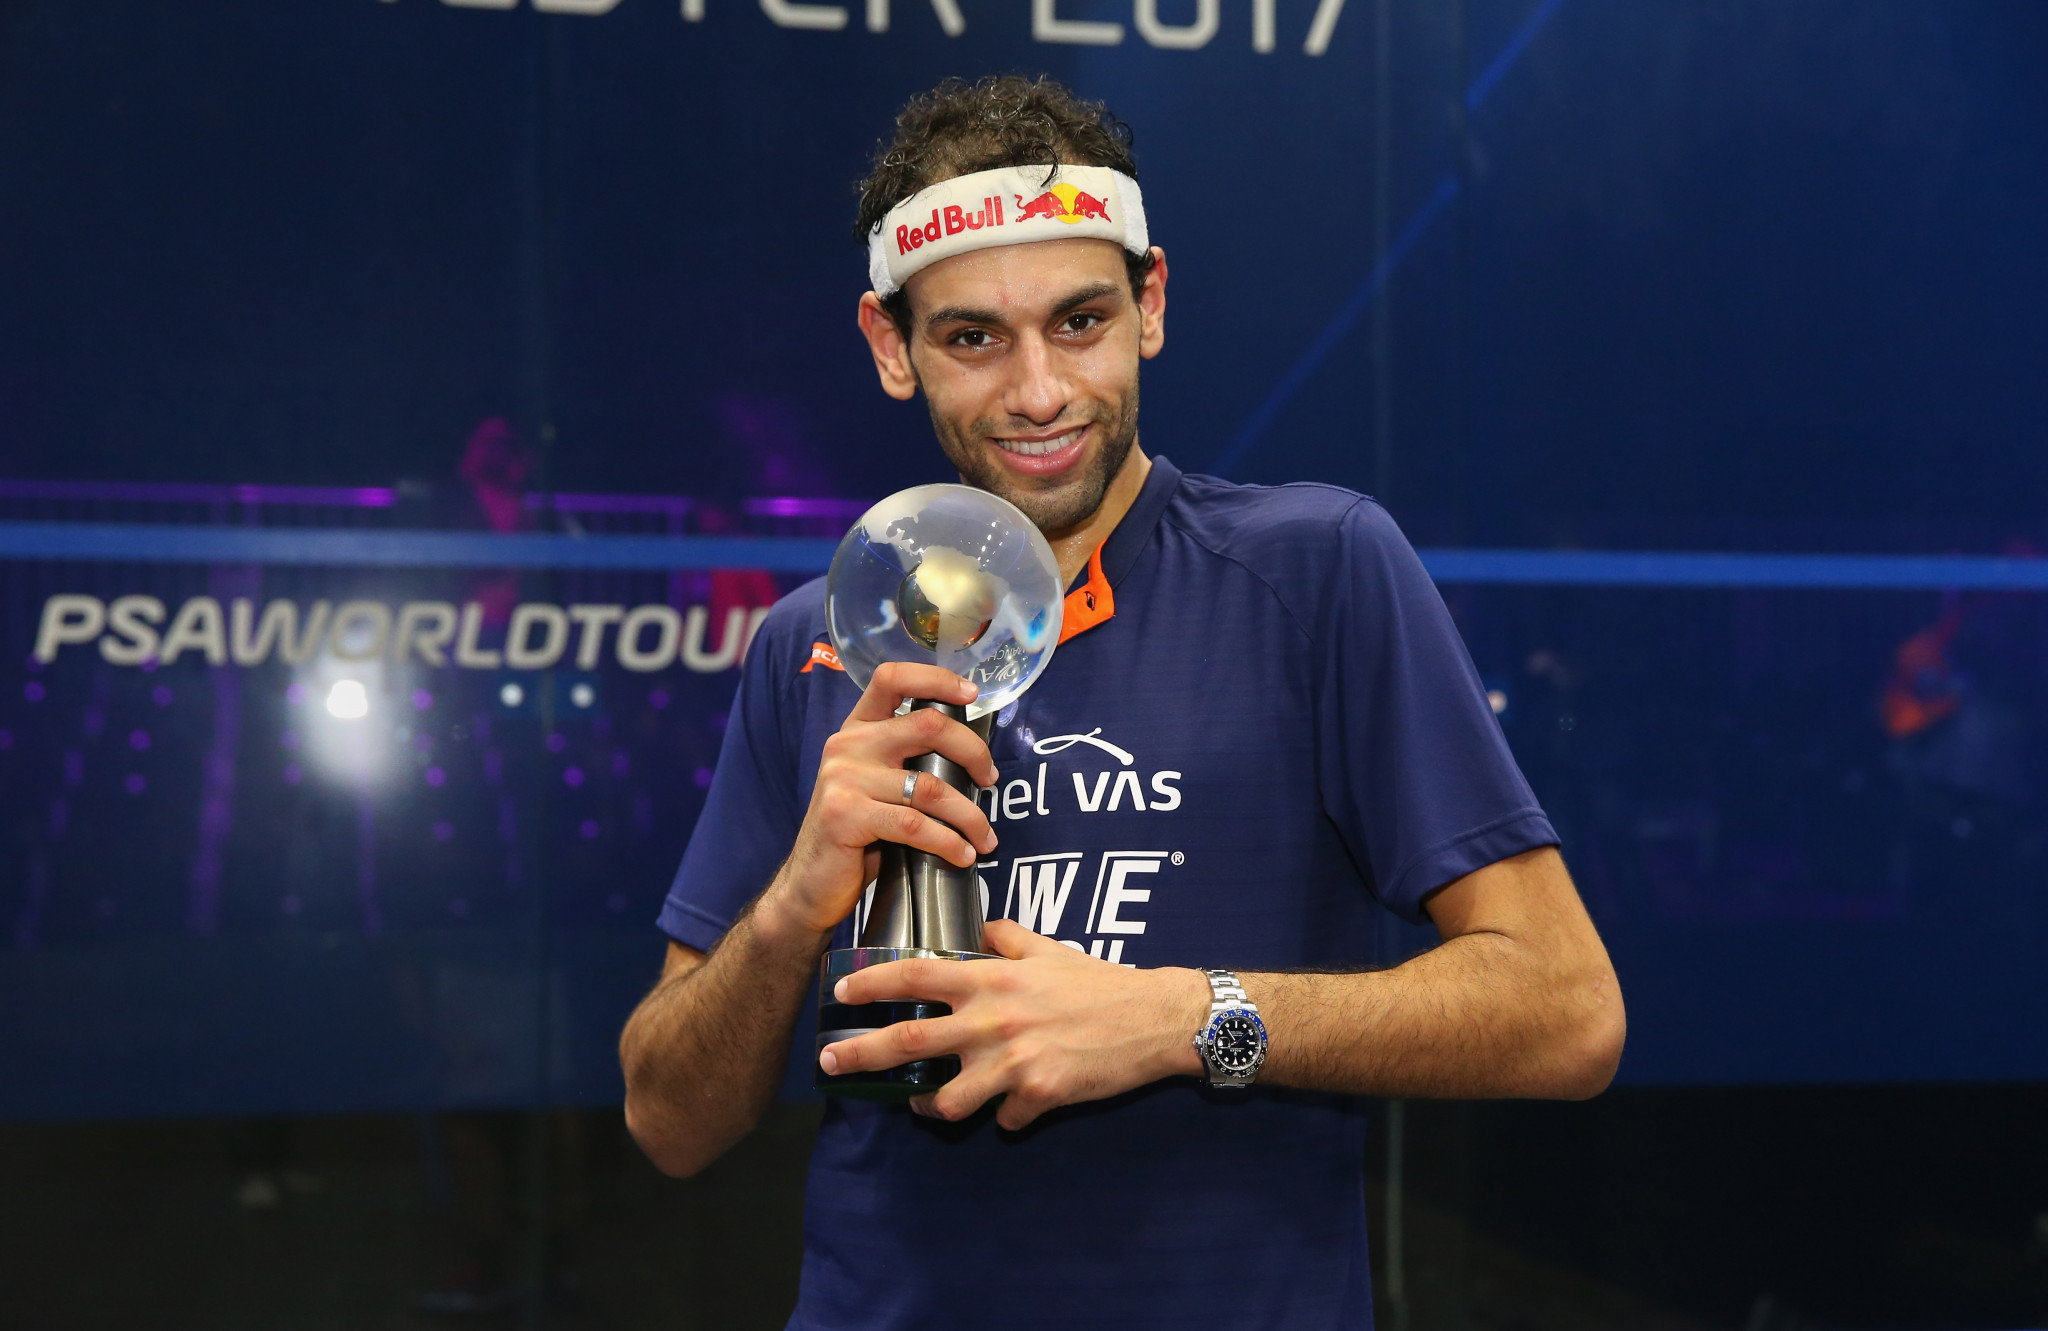 Egyptians tipped to dominate PSA British Open